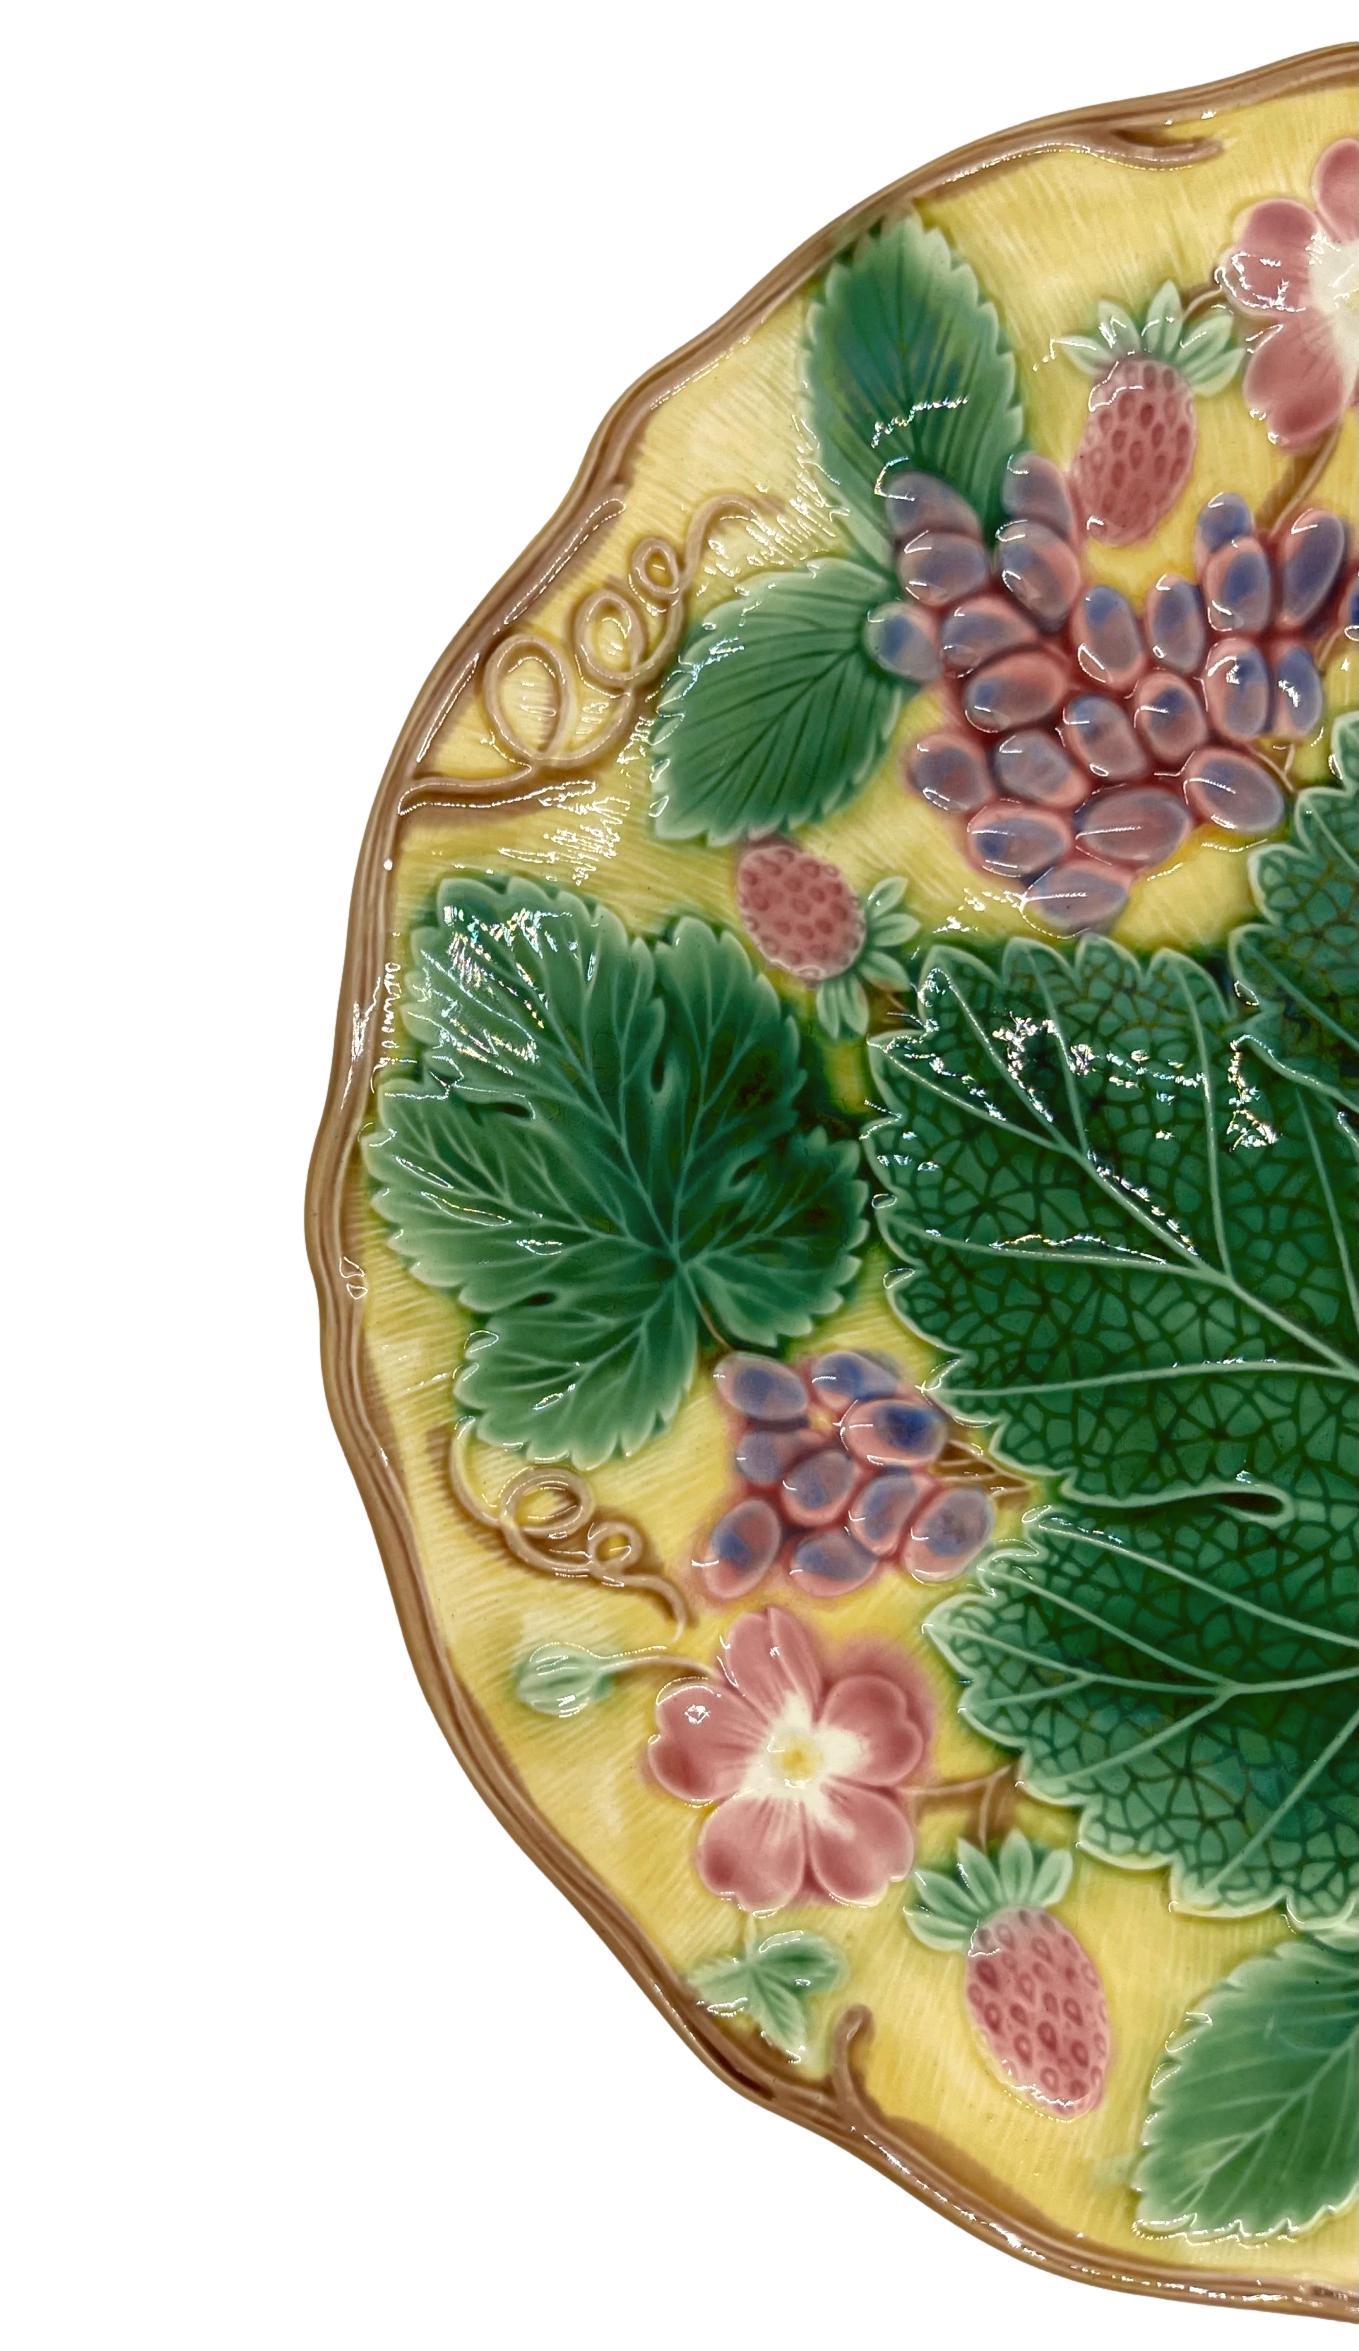 Wedgwood Majolica 'Vine & Strawberry' plate, English, dated 1933, 9-in diameter, with a large central green grape leaf, purple grapes, reddish pink strawberries and blossoms on a yellow ground. Impressed marks to reverse: 'Wedgwood' 'MADE IN